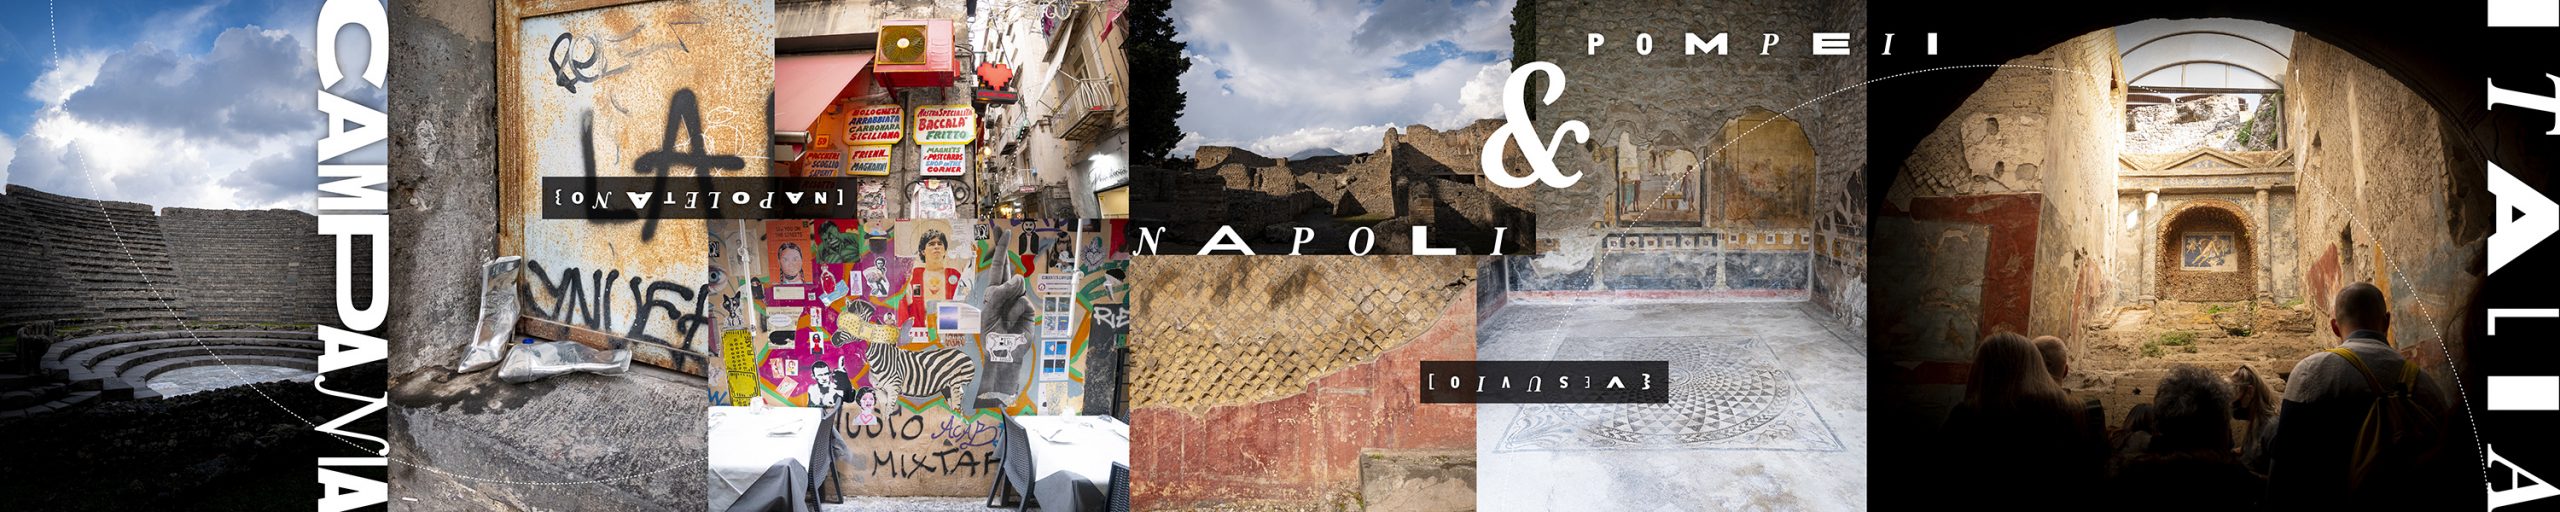 Jarred Elrod's Photos of Campania, Italia—mostly from Napoli and Pompei. 